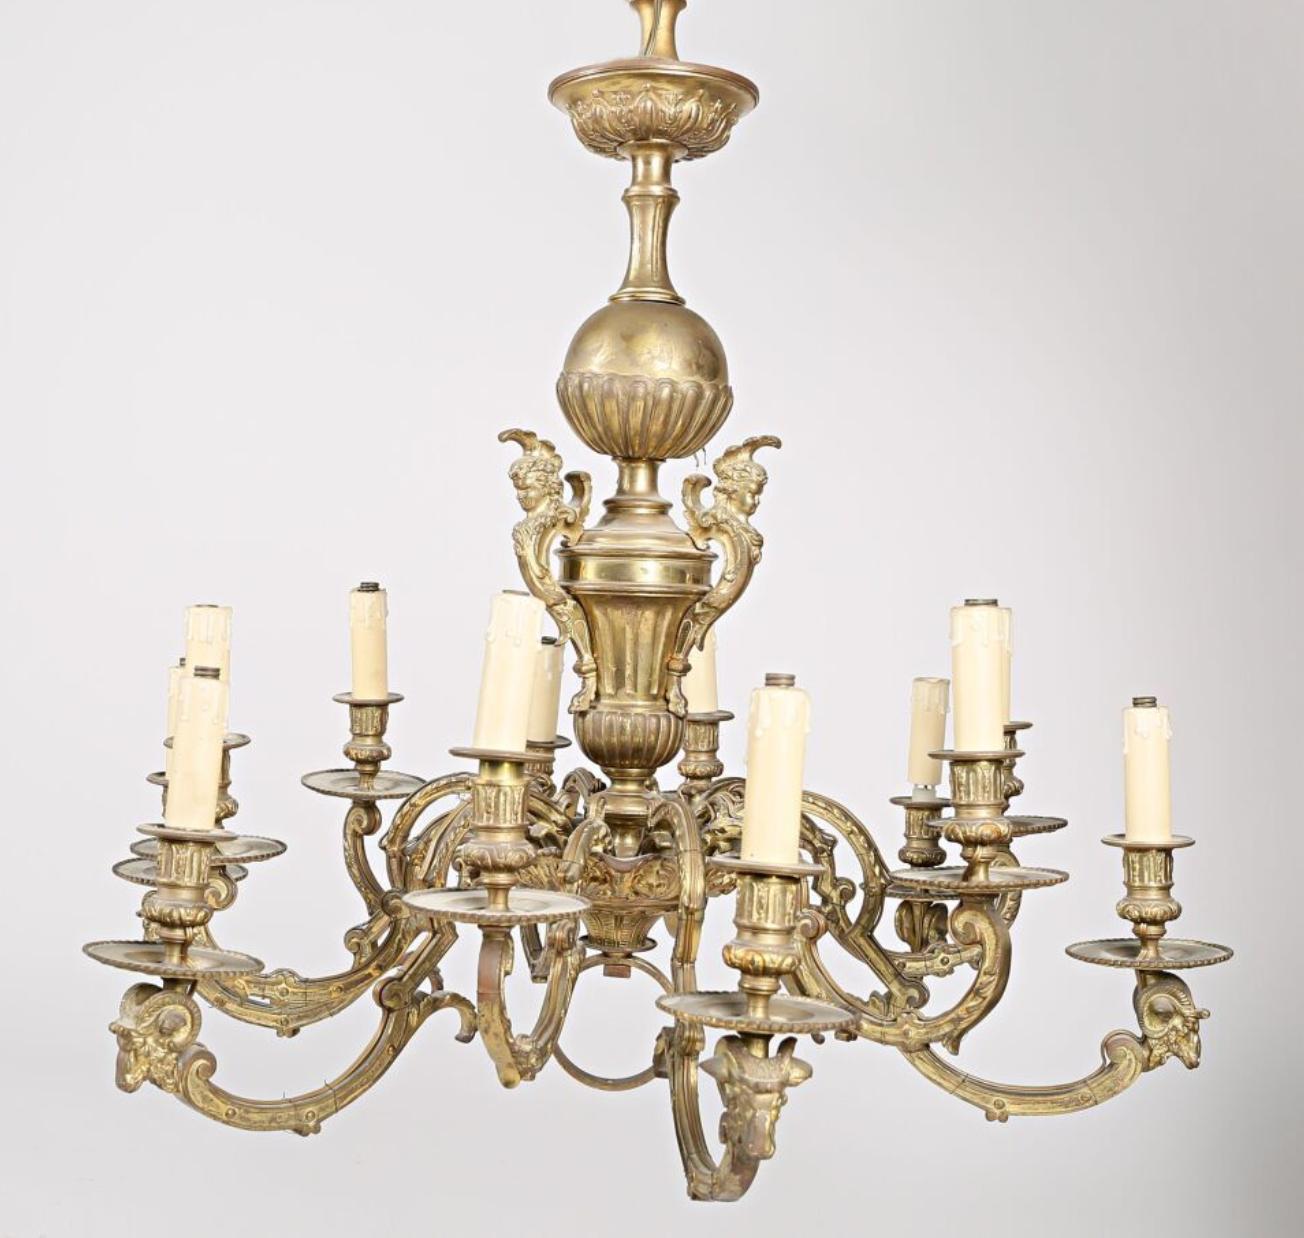 19th Century Large French Bronze Chandelier Decorated with Ram's Heads For Sale 1